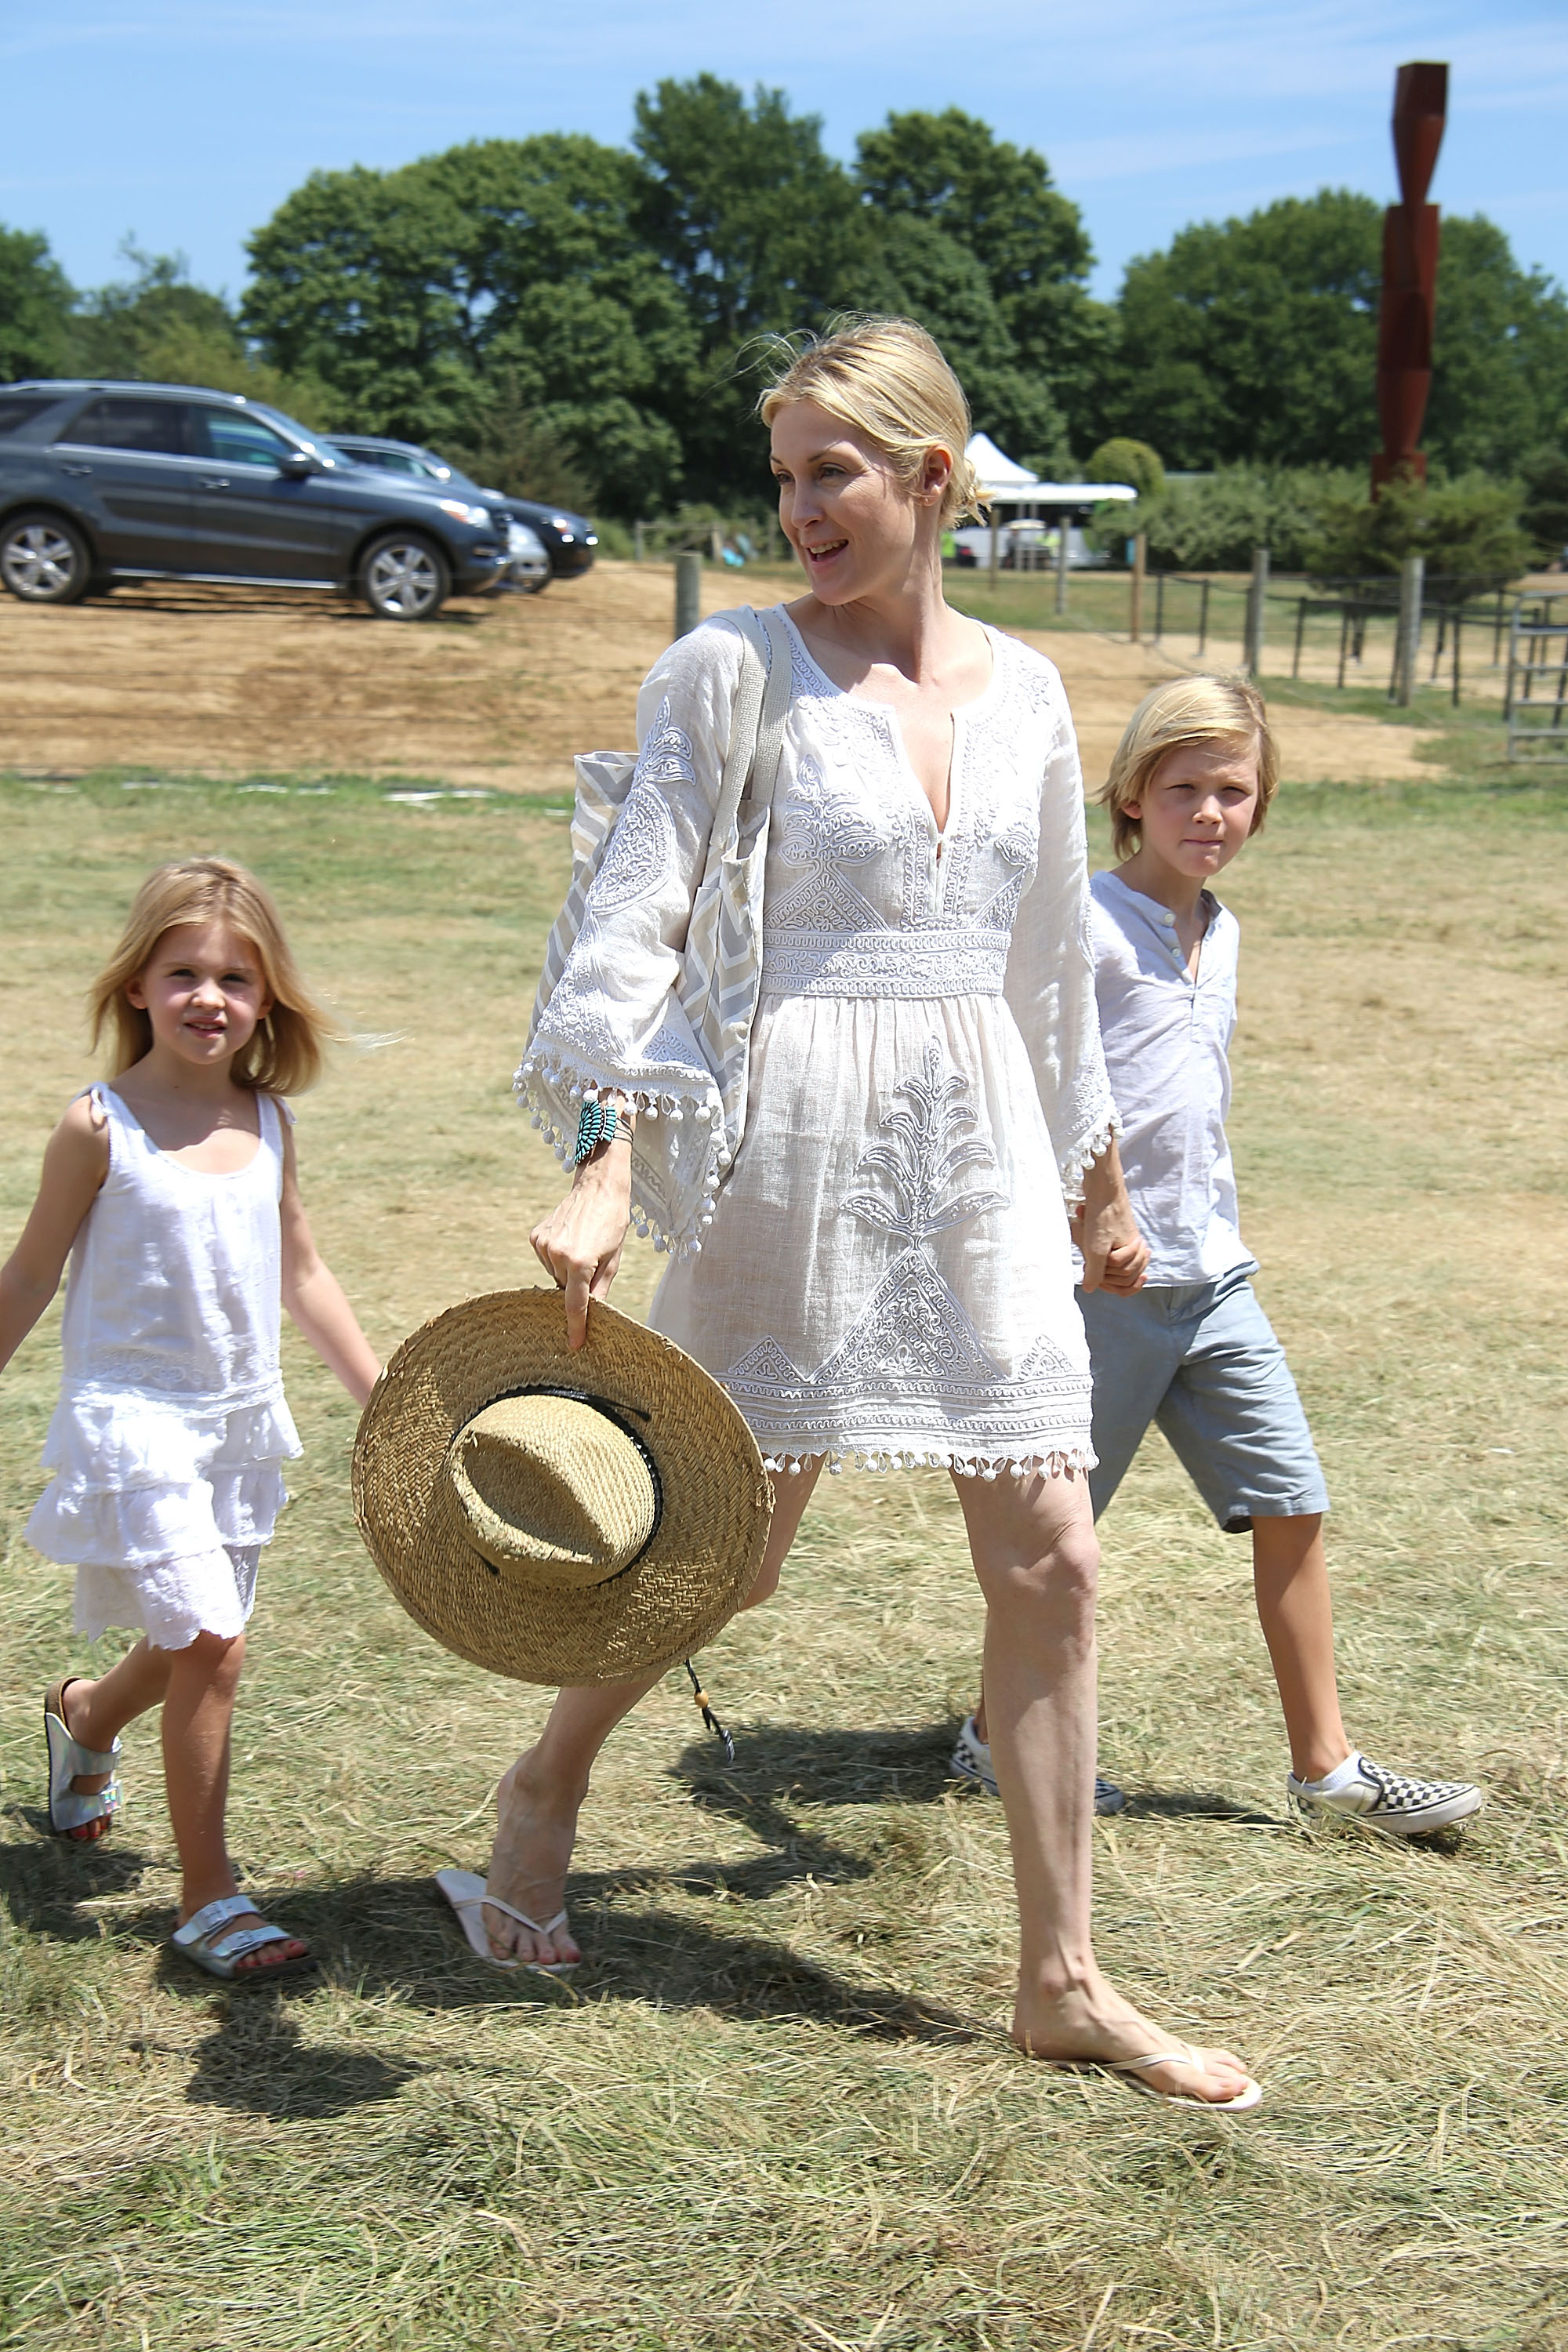 Kelly Rutherford and her children Helena and Hermès at the Ovarian Cancer Research Fund's Super Saturday NY on July 25, 2015, in Water Mill, New York | Source: Getty Images